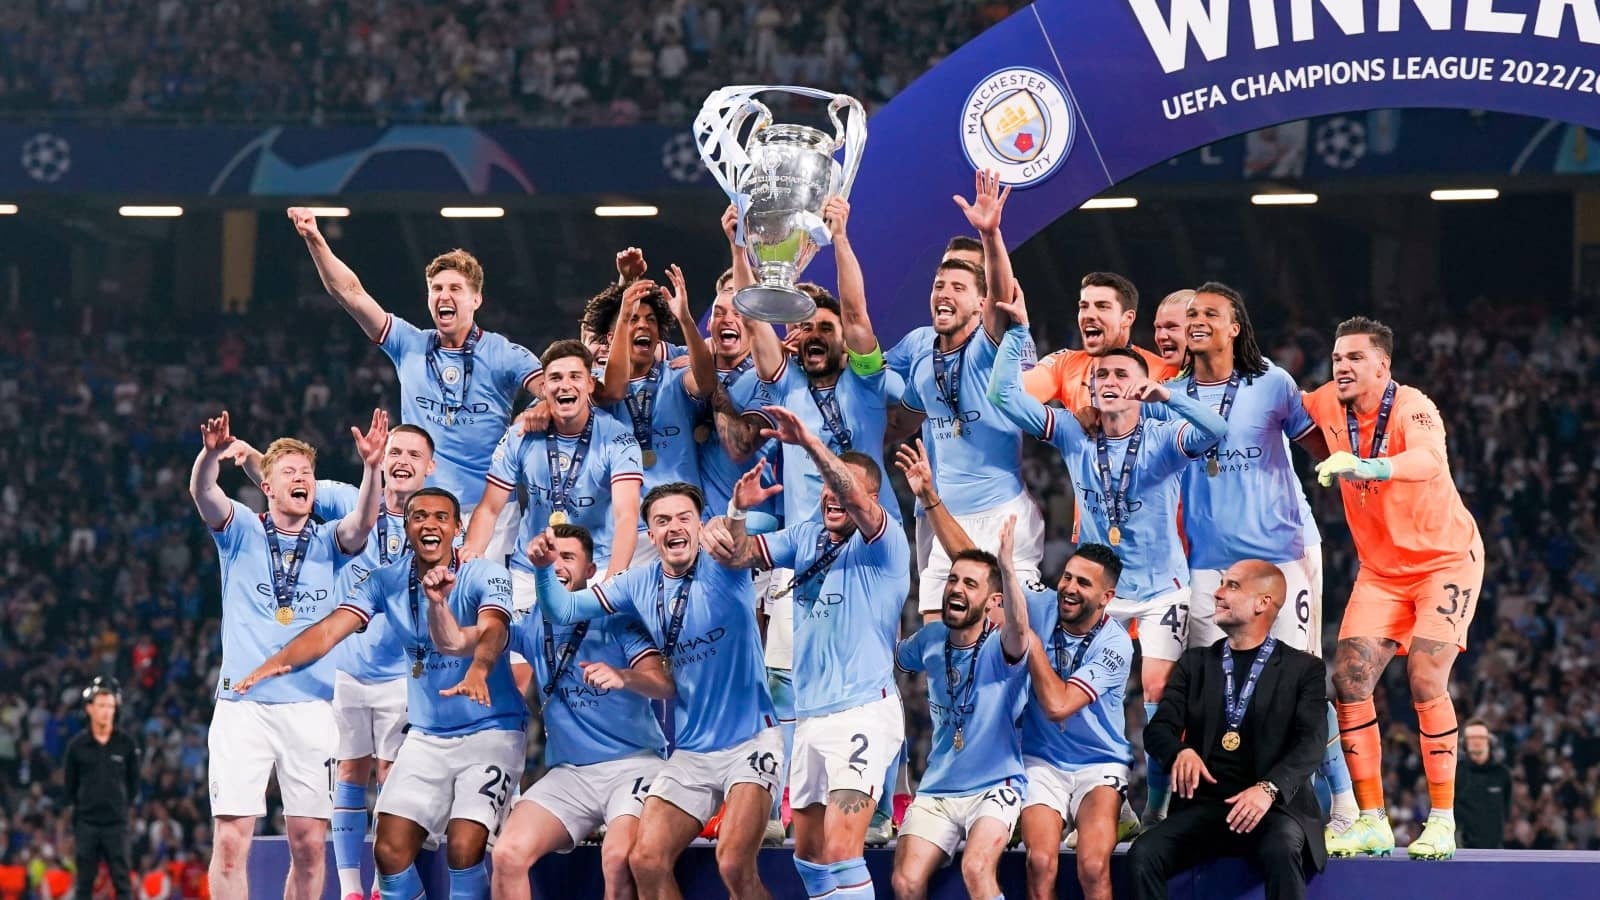 Rio Ferdinand lauds 'immortal' Man City side after treble triumph; backs club to make incredible gesture to players